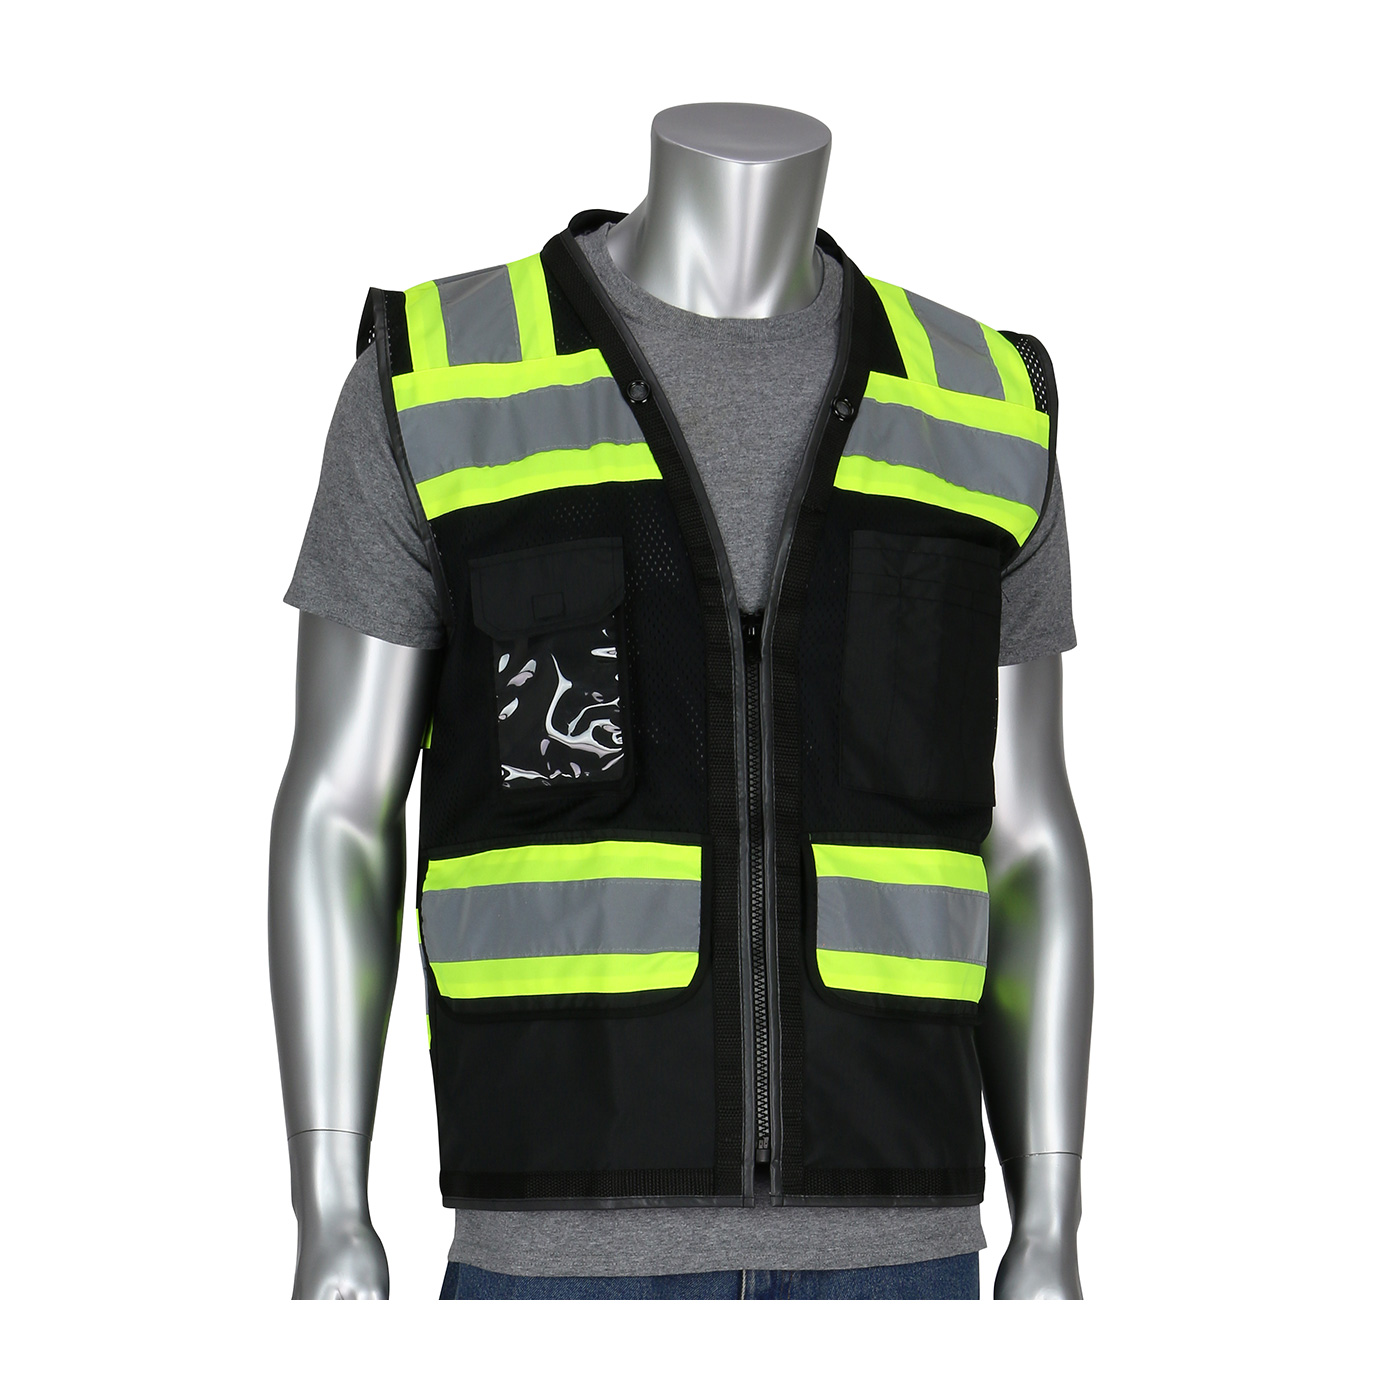 PIP ANSI Type O Class 1 Black Two-Tone 11 Pocket Mesh Vest from Columbia Safety